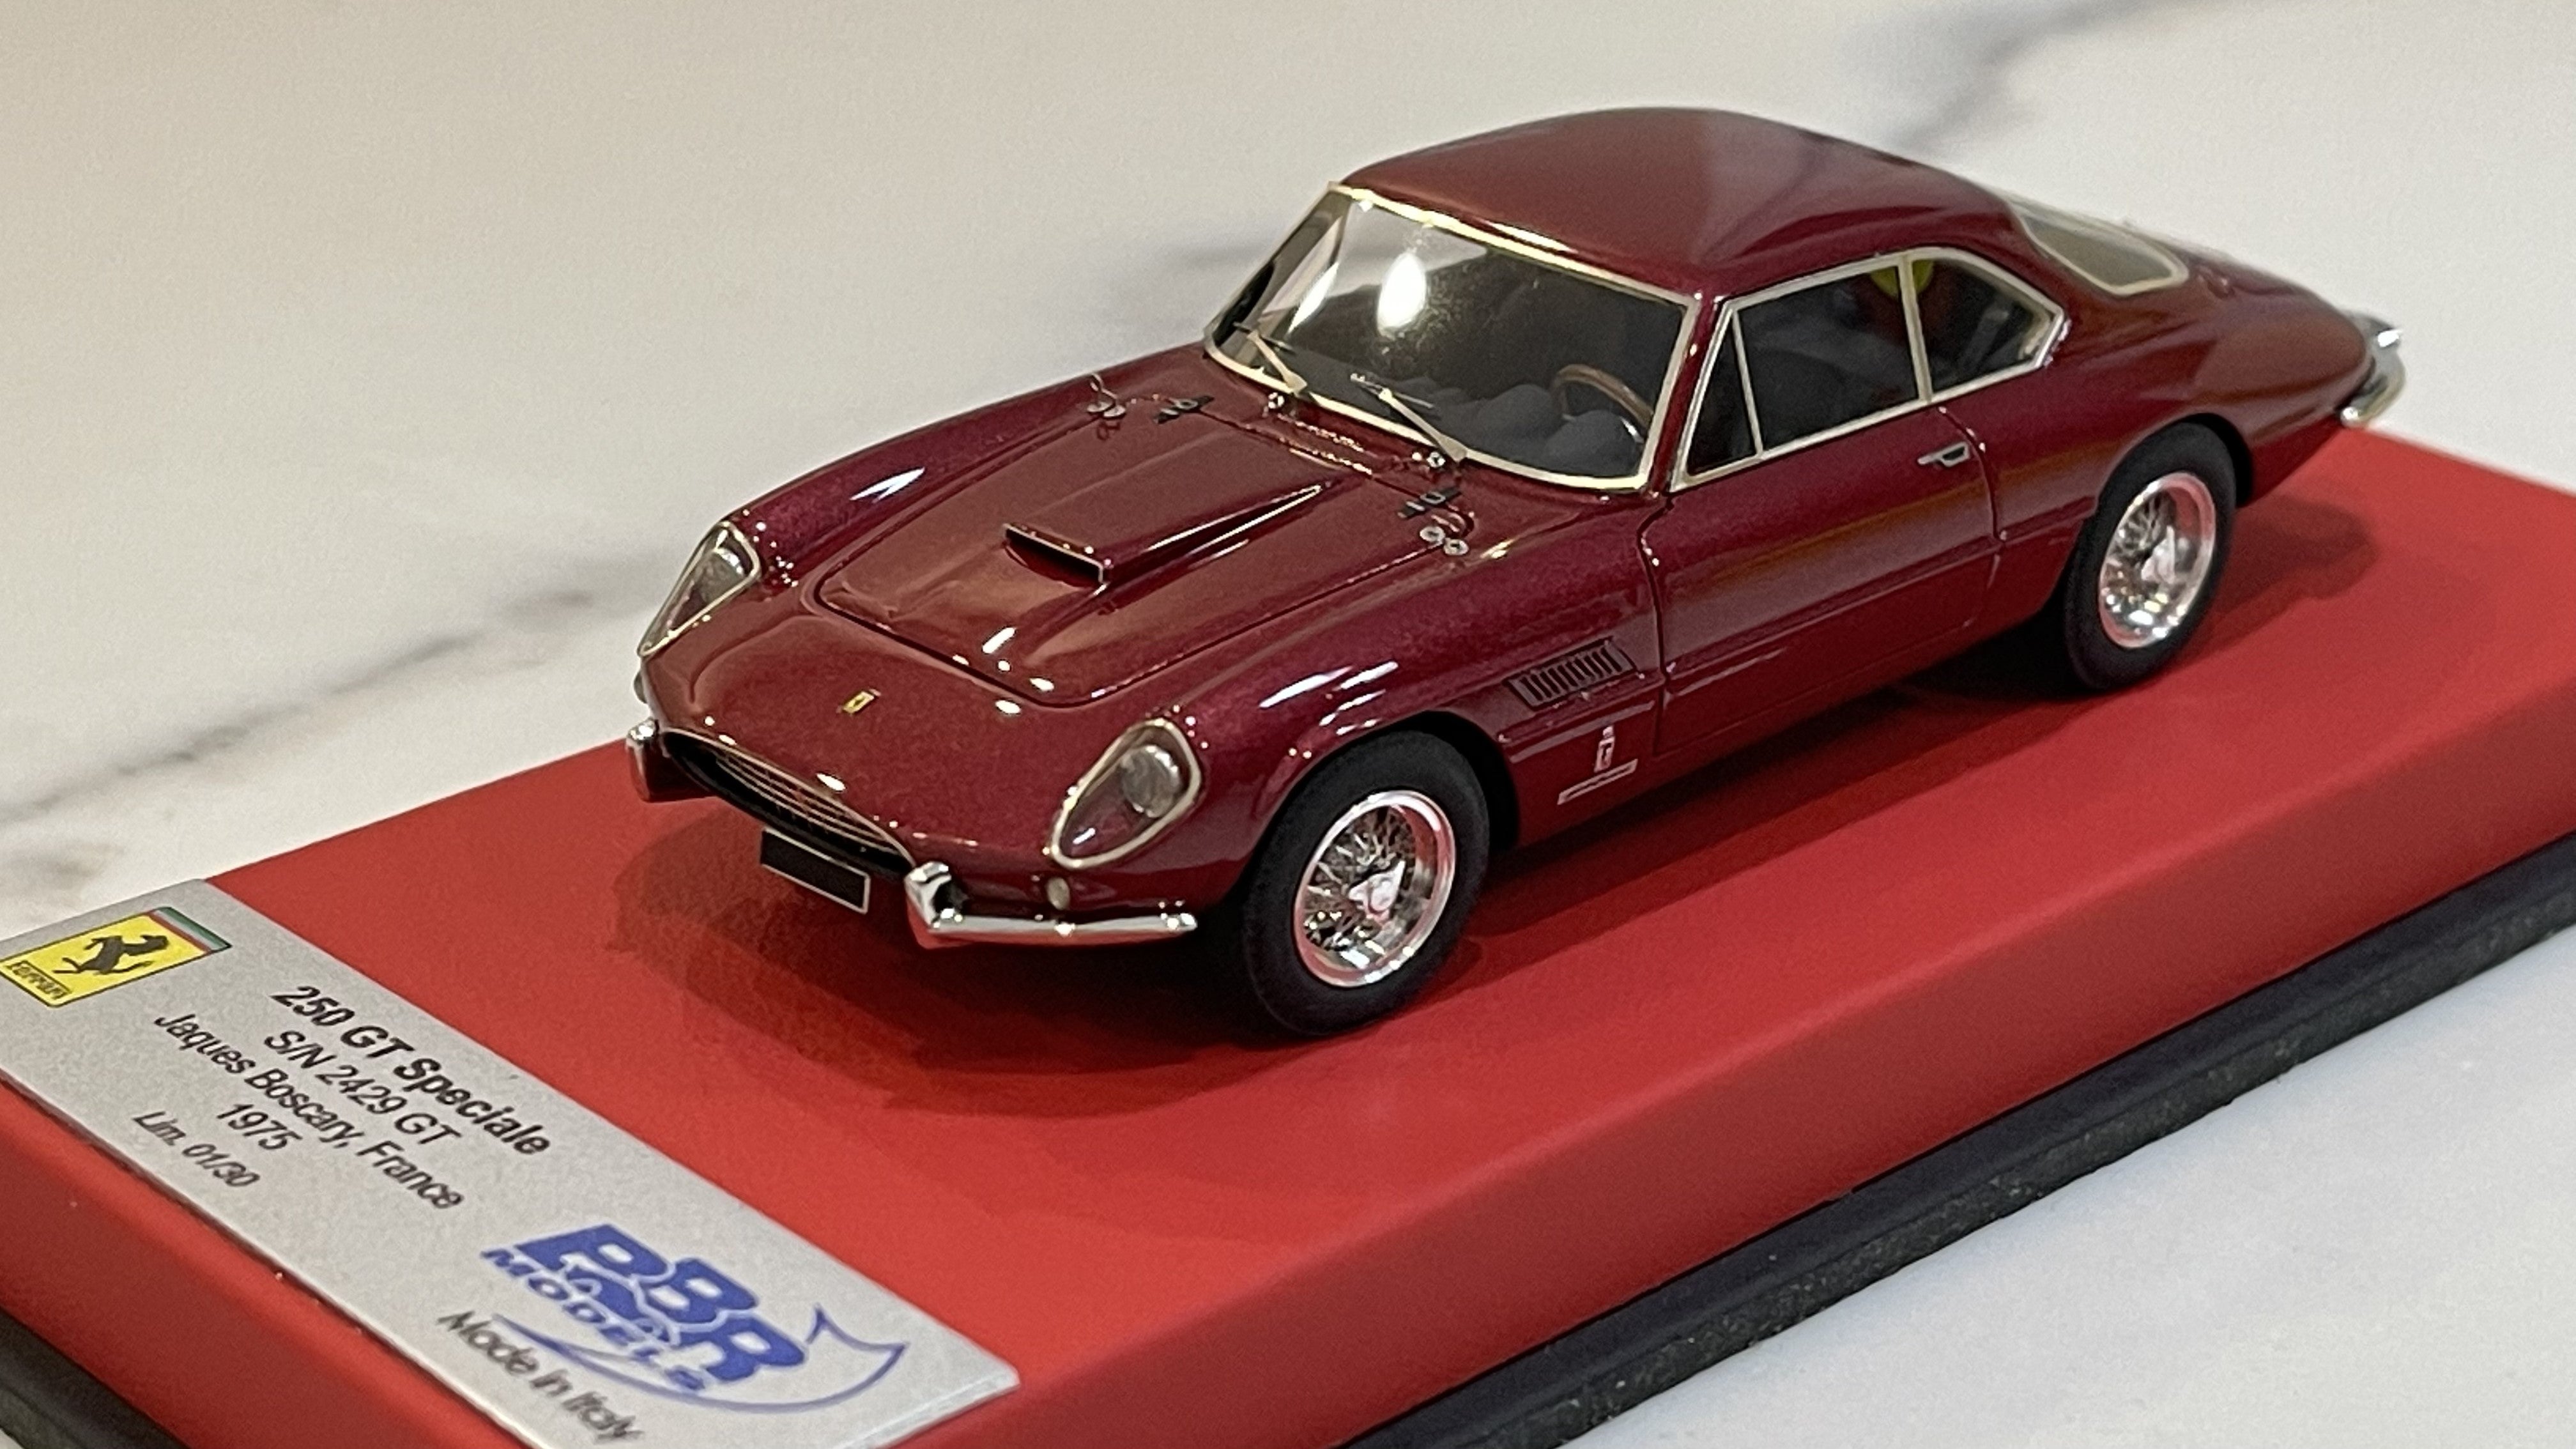 BBR 1/43 Ferrari 250 GT Speciale Coupe 2429GT Jaques Boscary Dark Red CAR49ALB